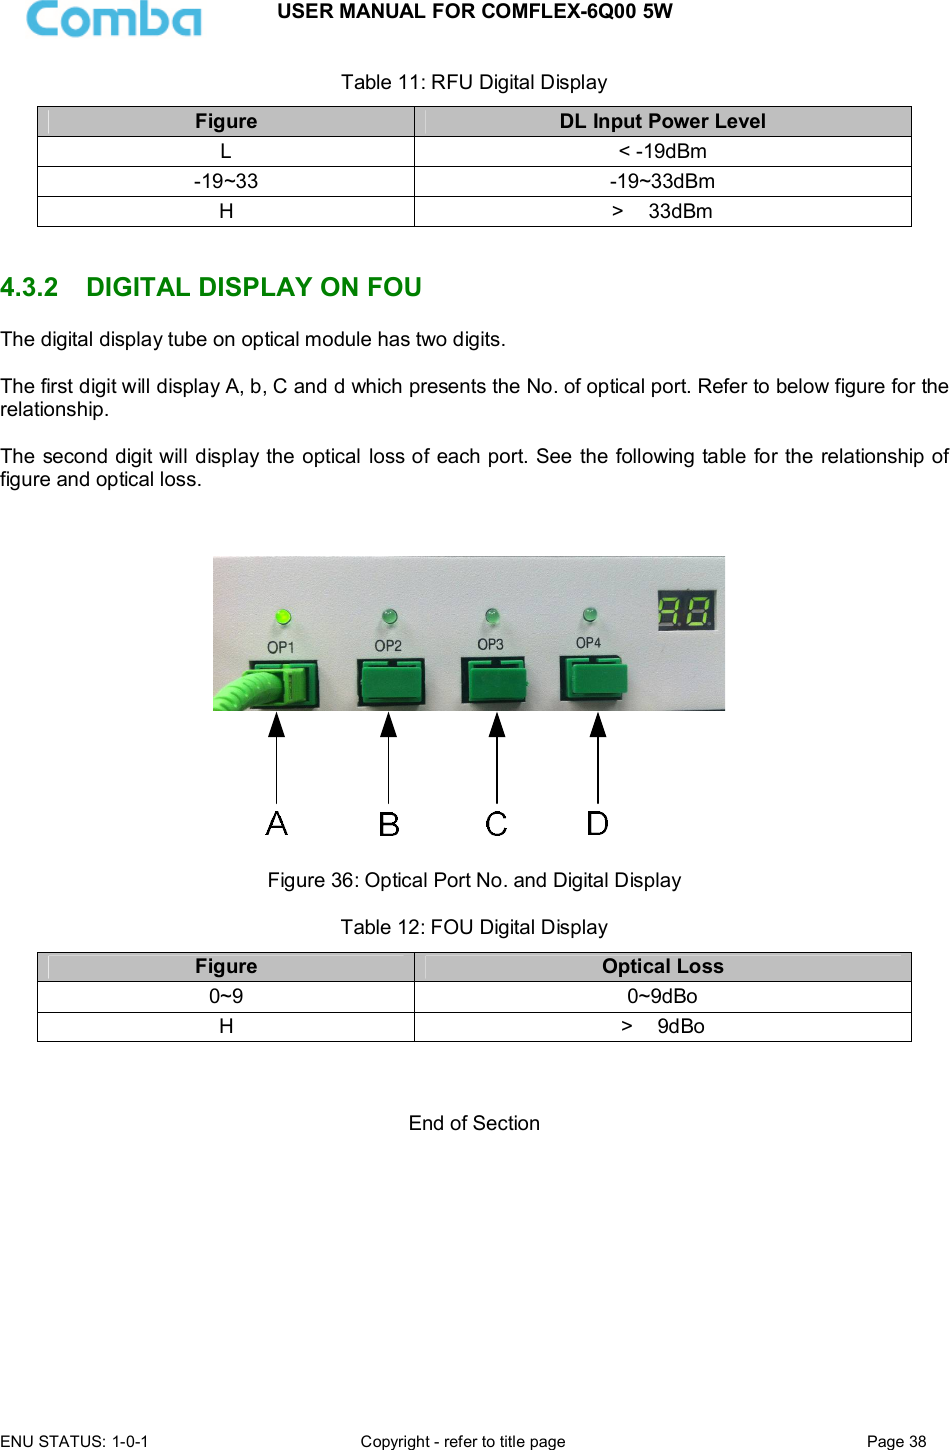 USER MANUAL FOR COMFLEX-6Q00 5W  ENU STATUS: 1-0-1  Copyright - refer to title page  Page 38      Table 11: RFU Digital Display  Figure  DL Input Power Level L  &lt; -19dBm -19~33  -19~33dBm H  &gt;  33dBm   4.3.2  DIGITAL DISPLAY ON FOU The digital display tube on optical module has two digits.   The first digit will display A, b, C and d which presents the No. of optical port. Refer to below figure for the relationship.  The second digit will display the optical loss of each port. See the following table for the relationship of figure and optical loss.   Figure 36: Optical Port No. and Digital Display  Table 12: FOU Digital Display  Figure  Optical Loss 0~9  0~9dBo H  &gt;  9dBo    End of Section